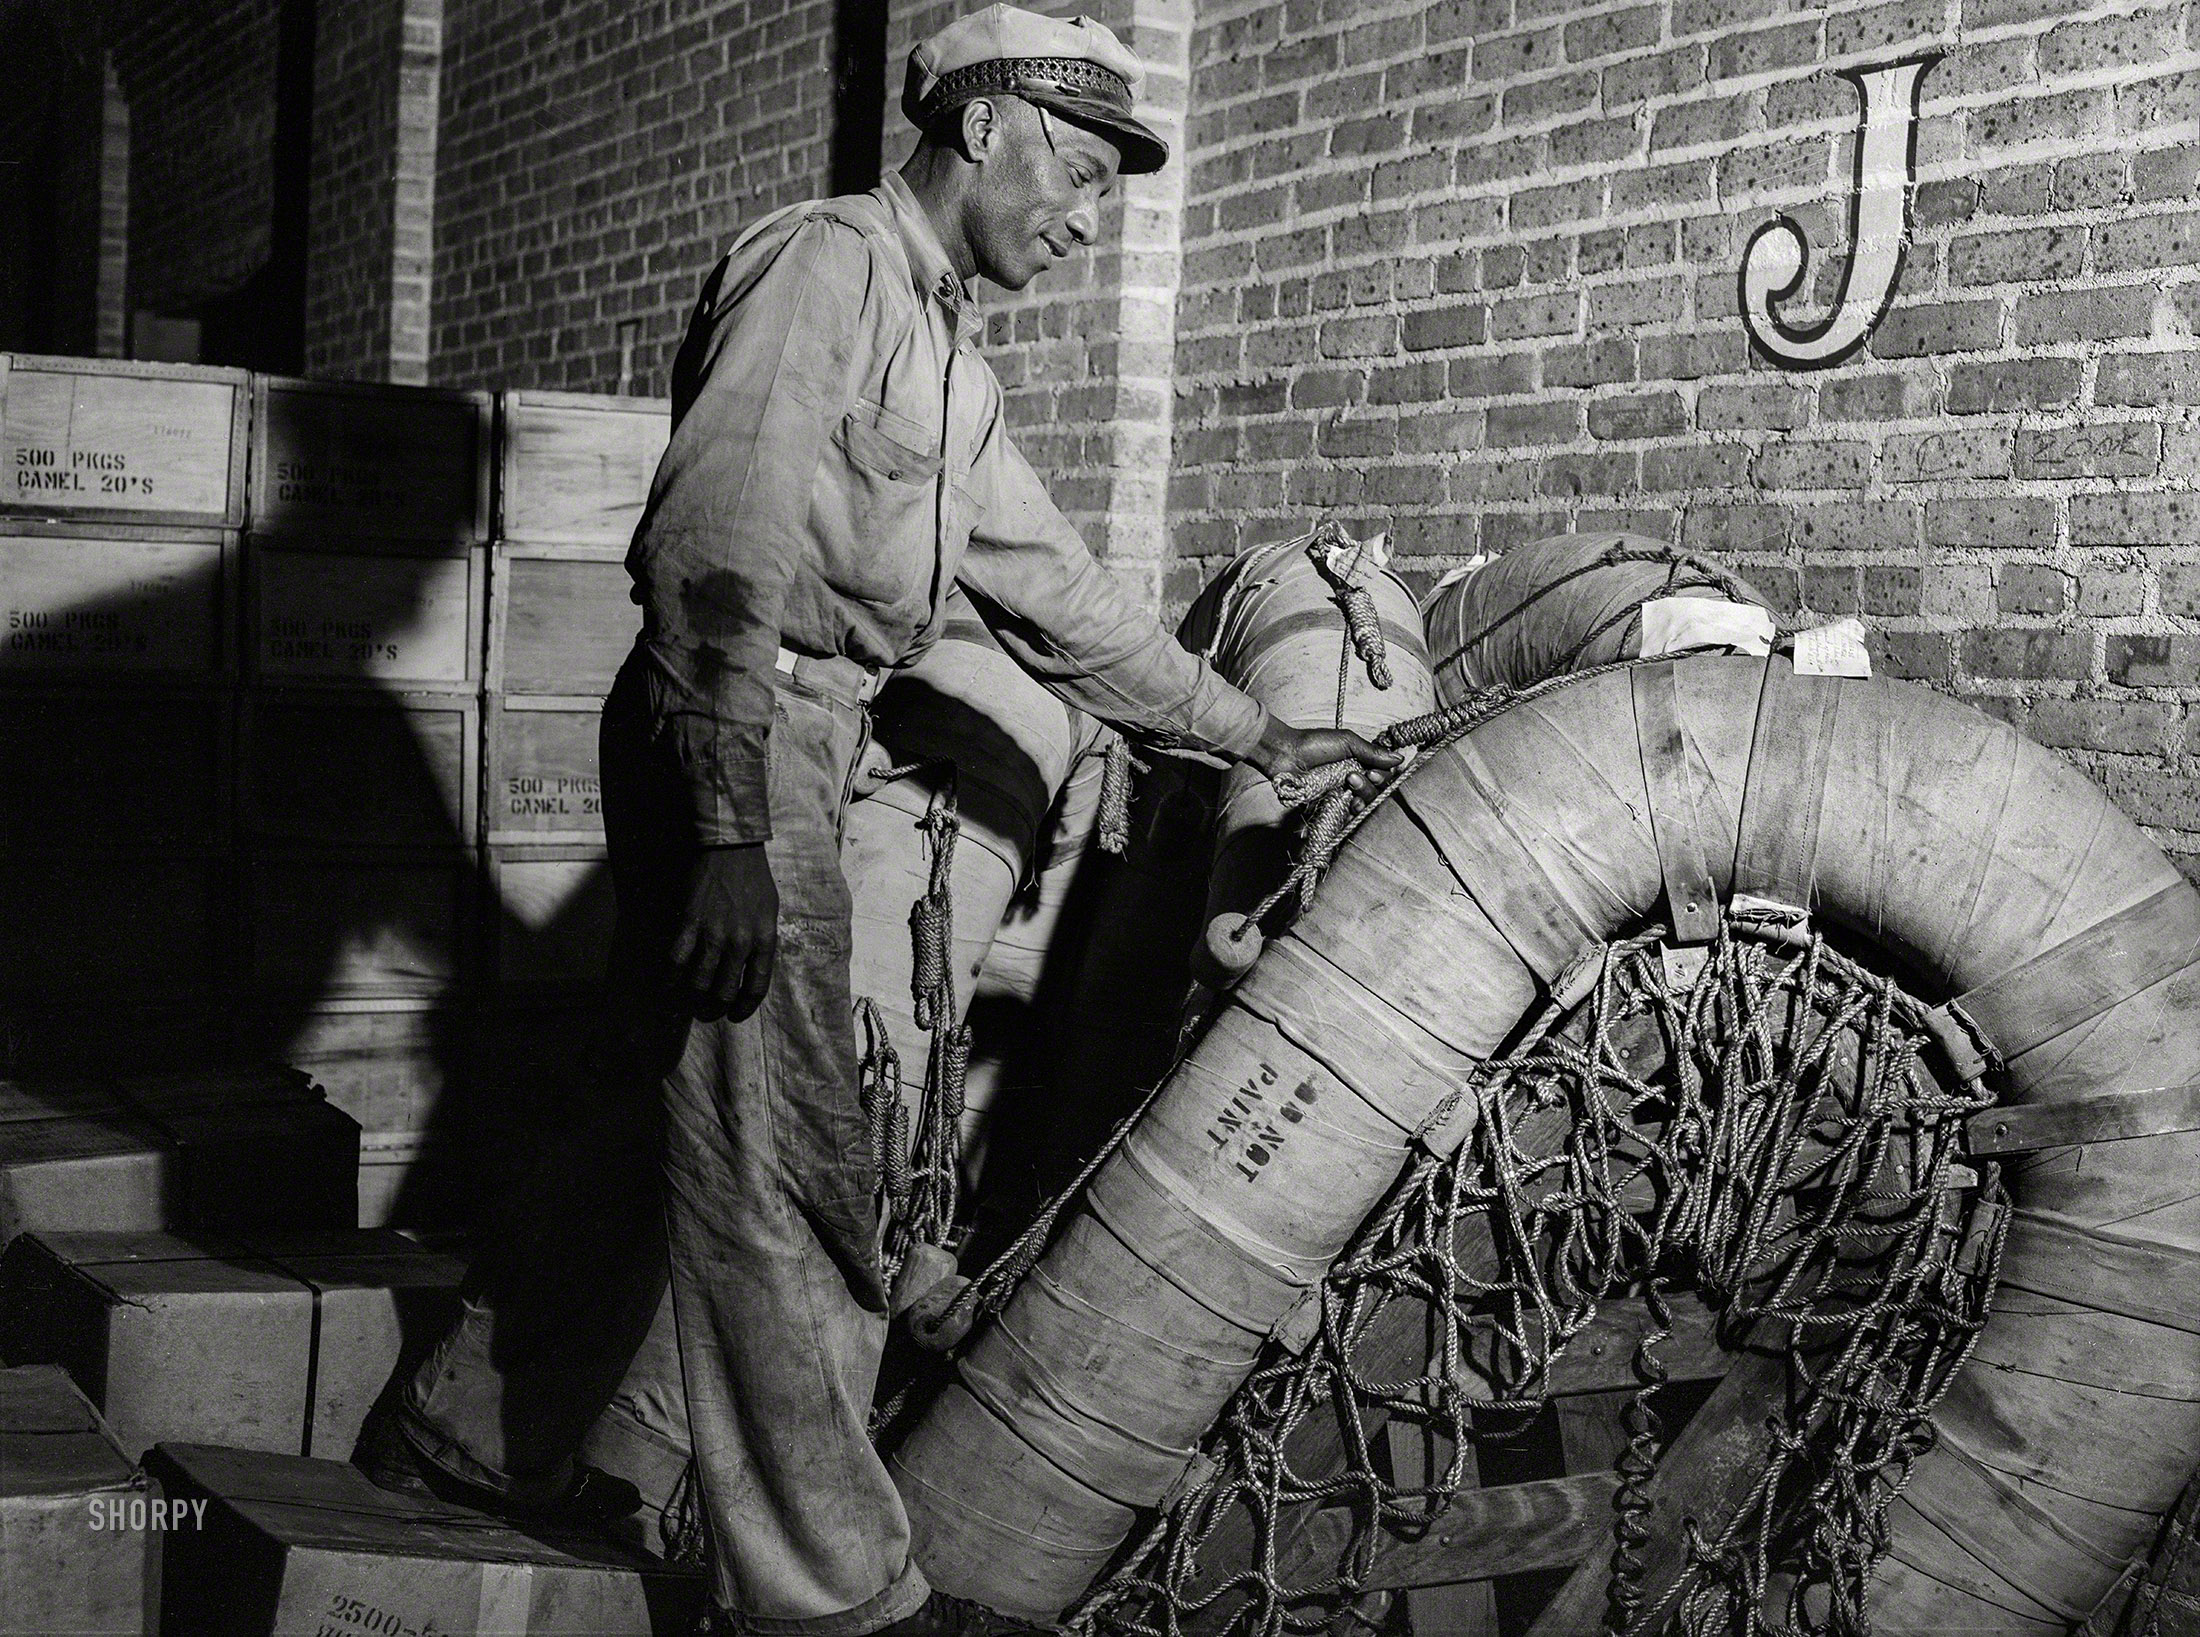 March 1943. "New Orleans, Louisiana. Loading a rubber raft onto a truck at the terminal of Associated Transport Company." Medium format negative by John Vachon for the Office of War Information. View full size.